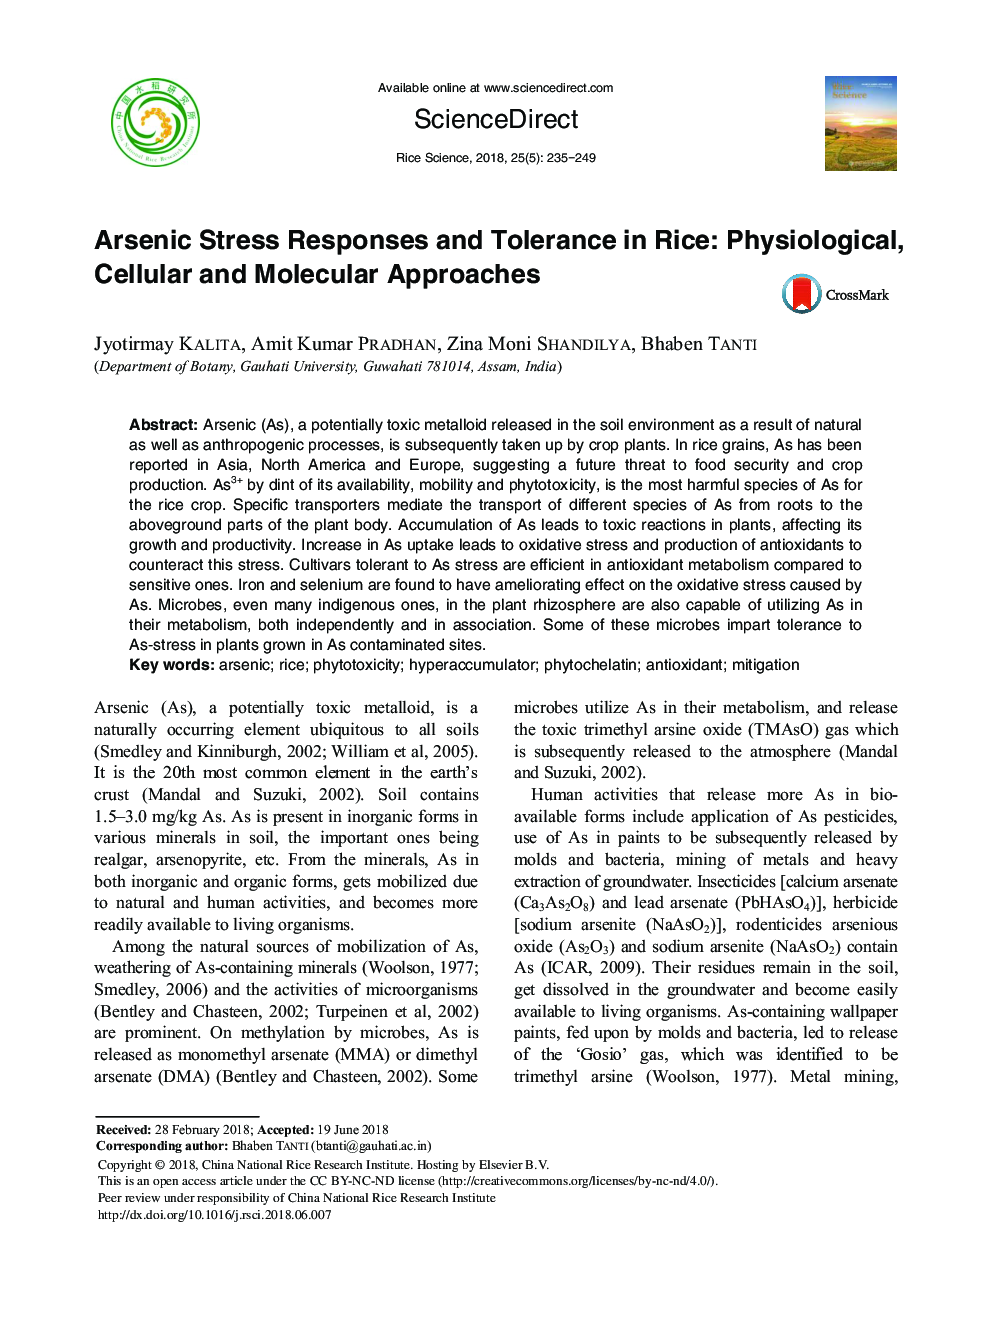 Arsenic Stress Responses and Tolerance in Rice: Physiological, Cellular and Molecular Approaches